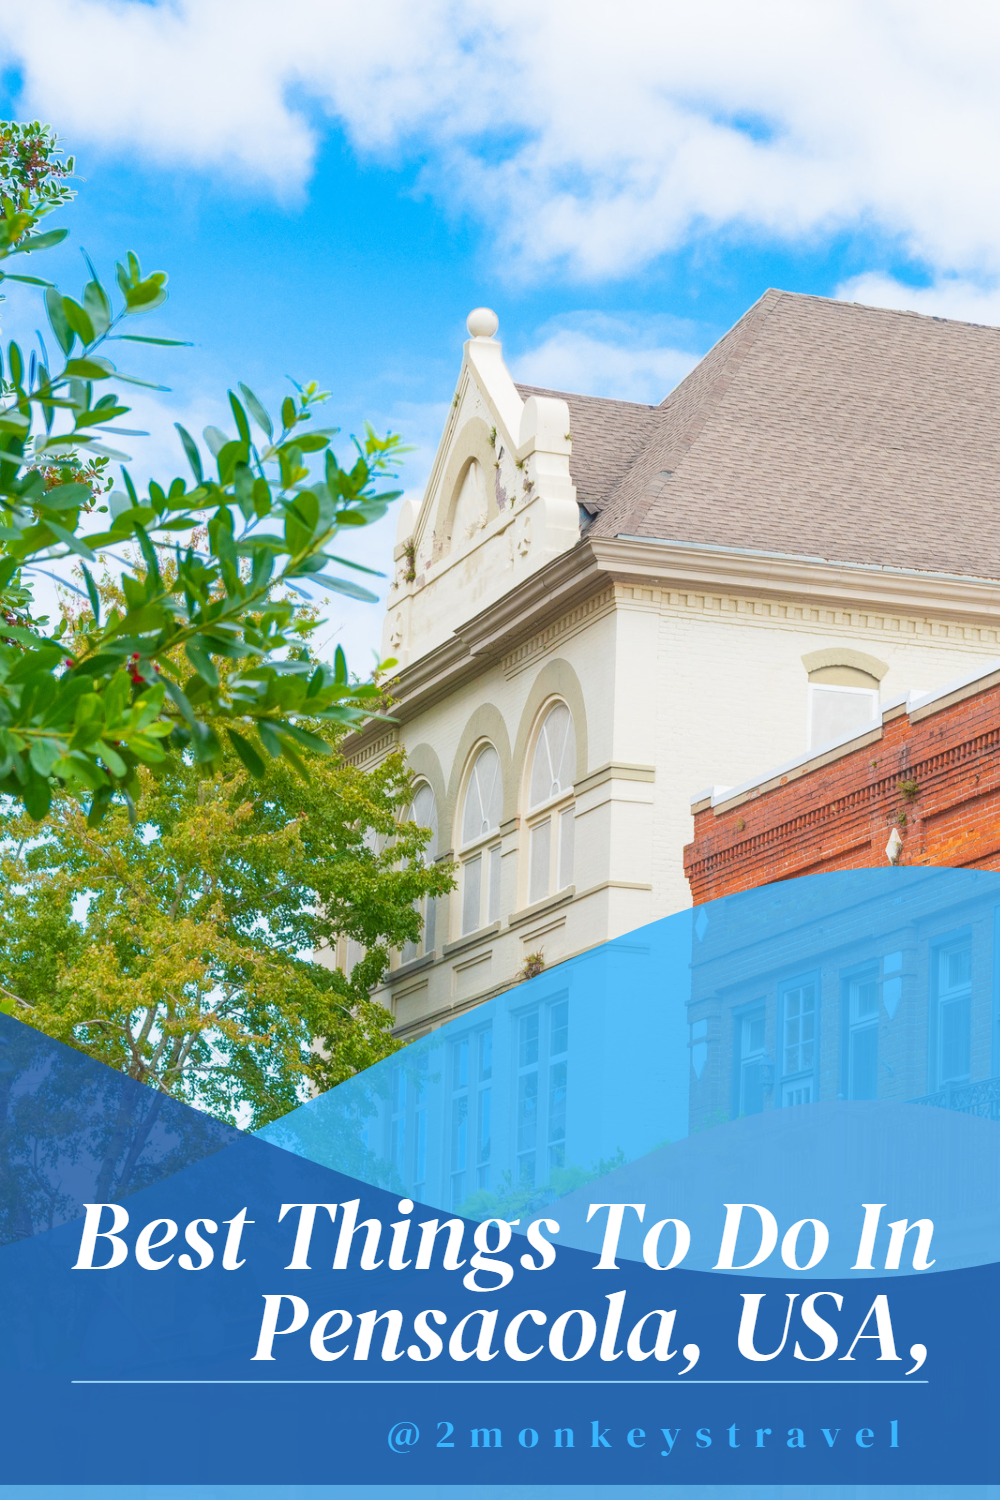 6 Best Things To Do in Pensacola 1